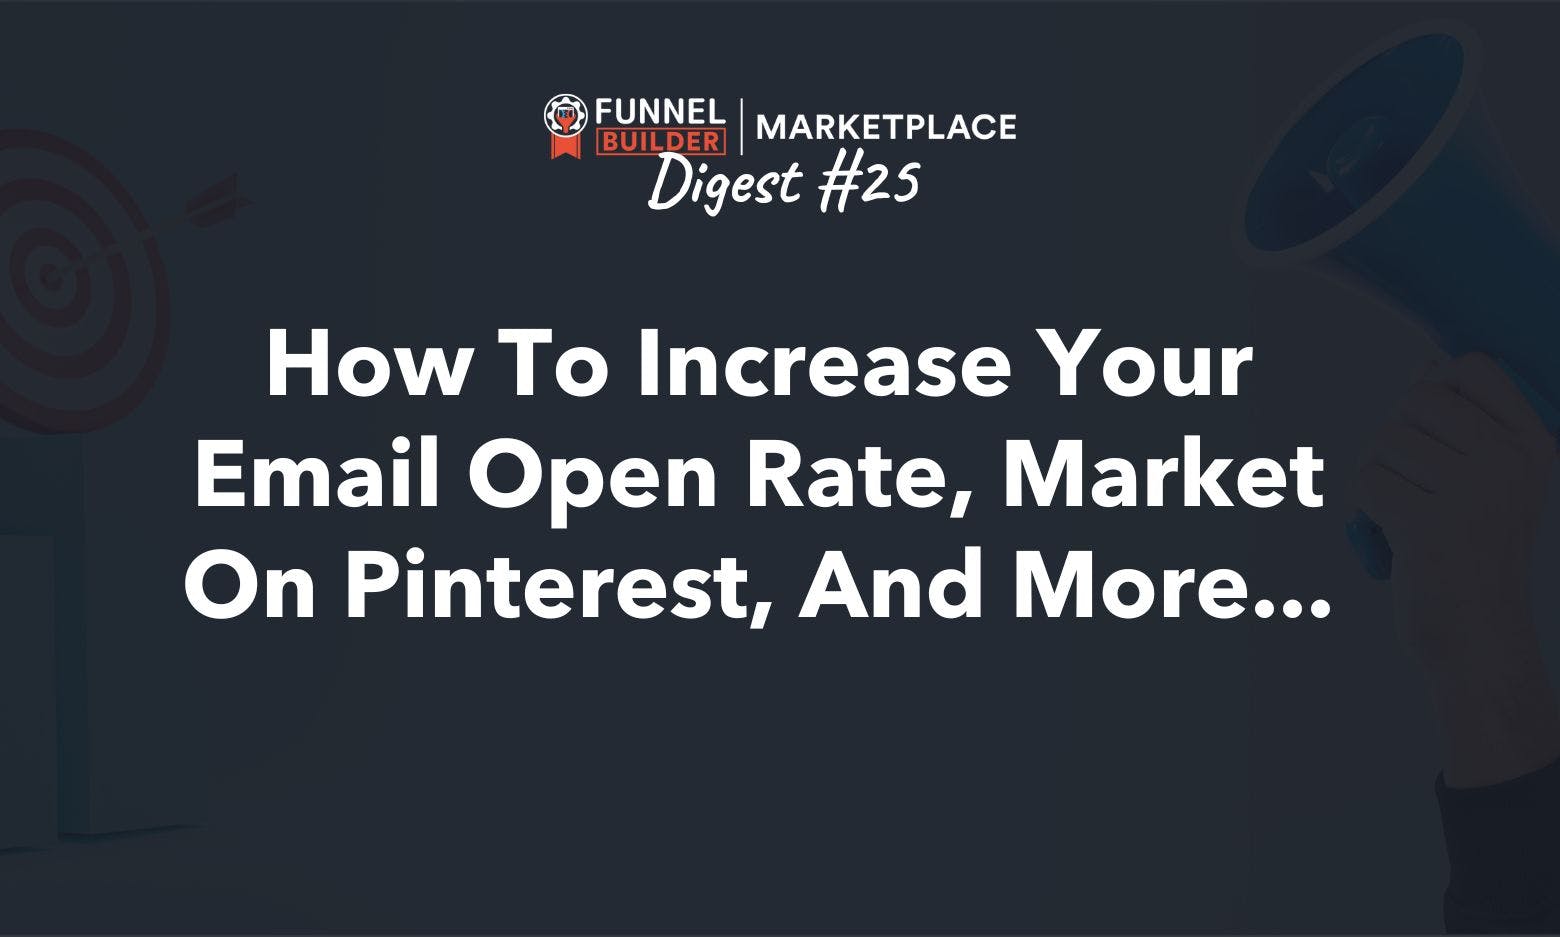 FBM Digest #25: How to increase your email open rate, market on Pinterest, and more...